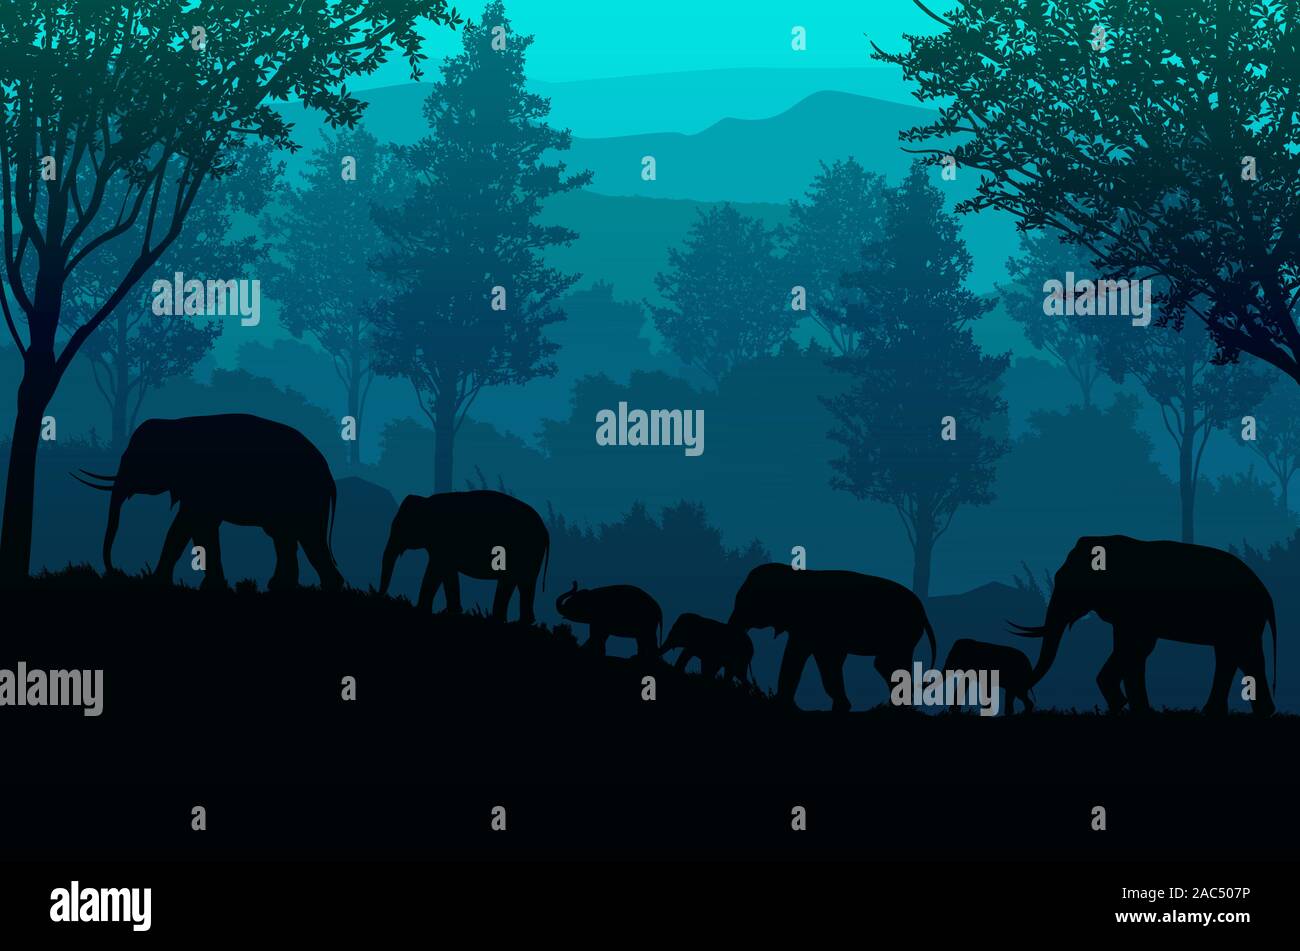 The elephants  in the forest Natural jungle green mountains horizon trees Landscape wallpaper Sunrise and sunset  Illustration vector style Stock Vector